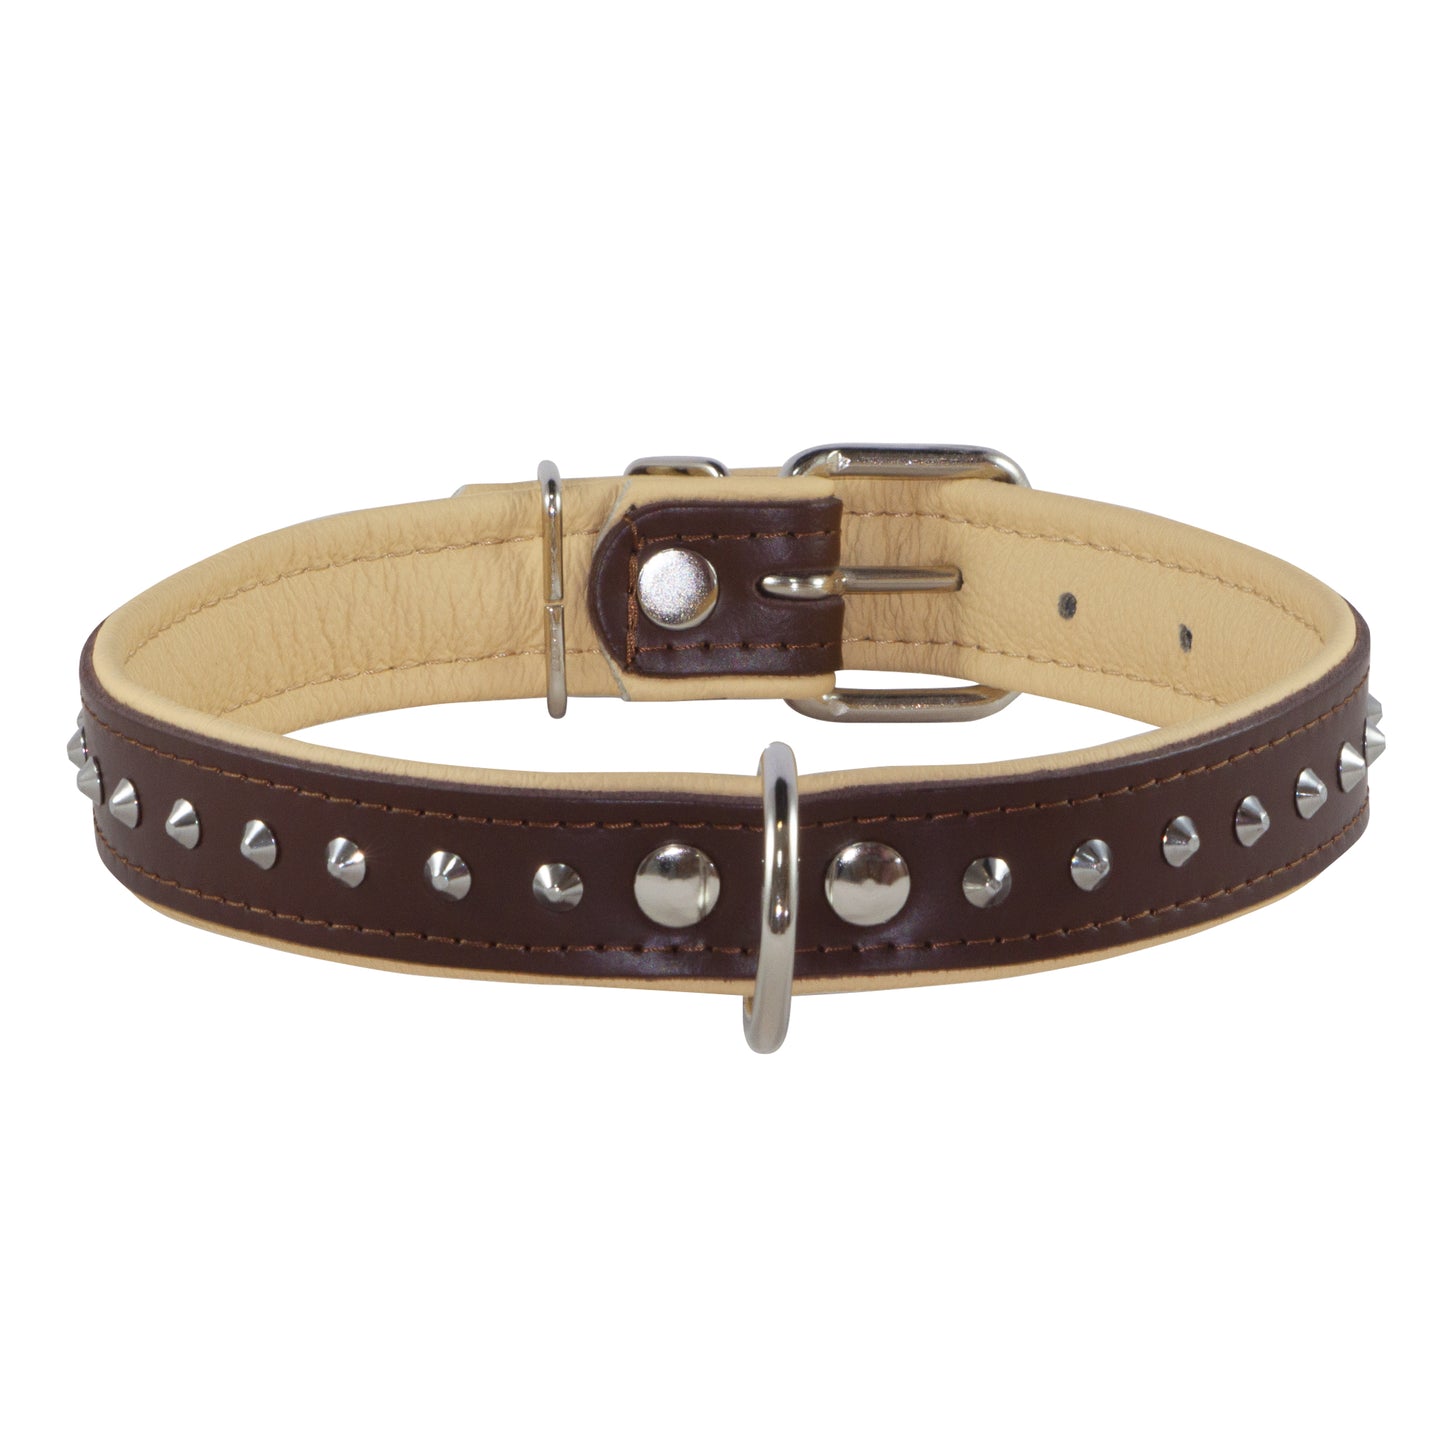 Corspet Full Grain Nappa Leather Dog Collar - Studded Leather with Silver Nickel Plated Hardware